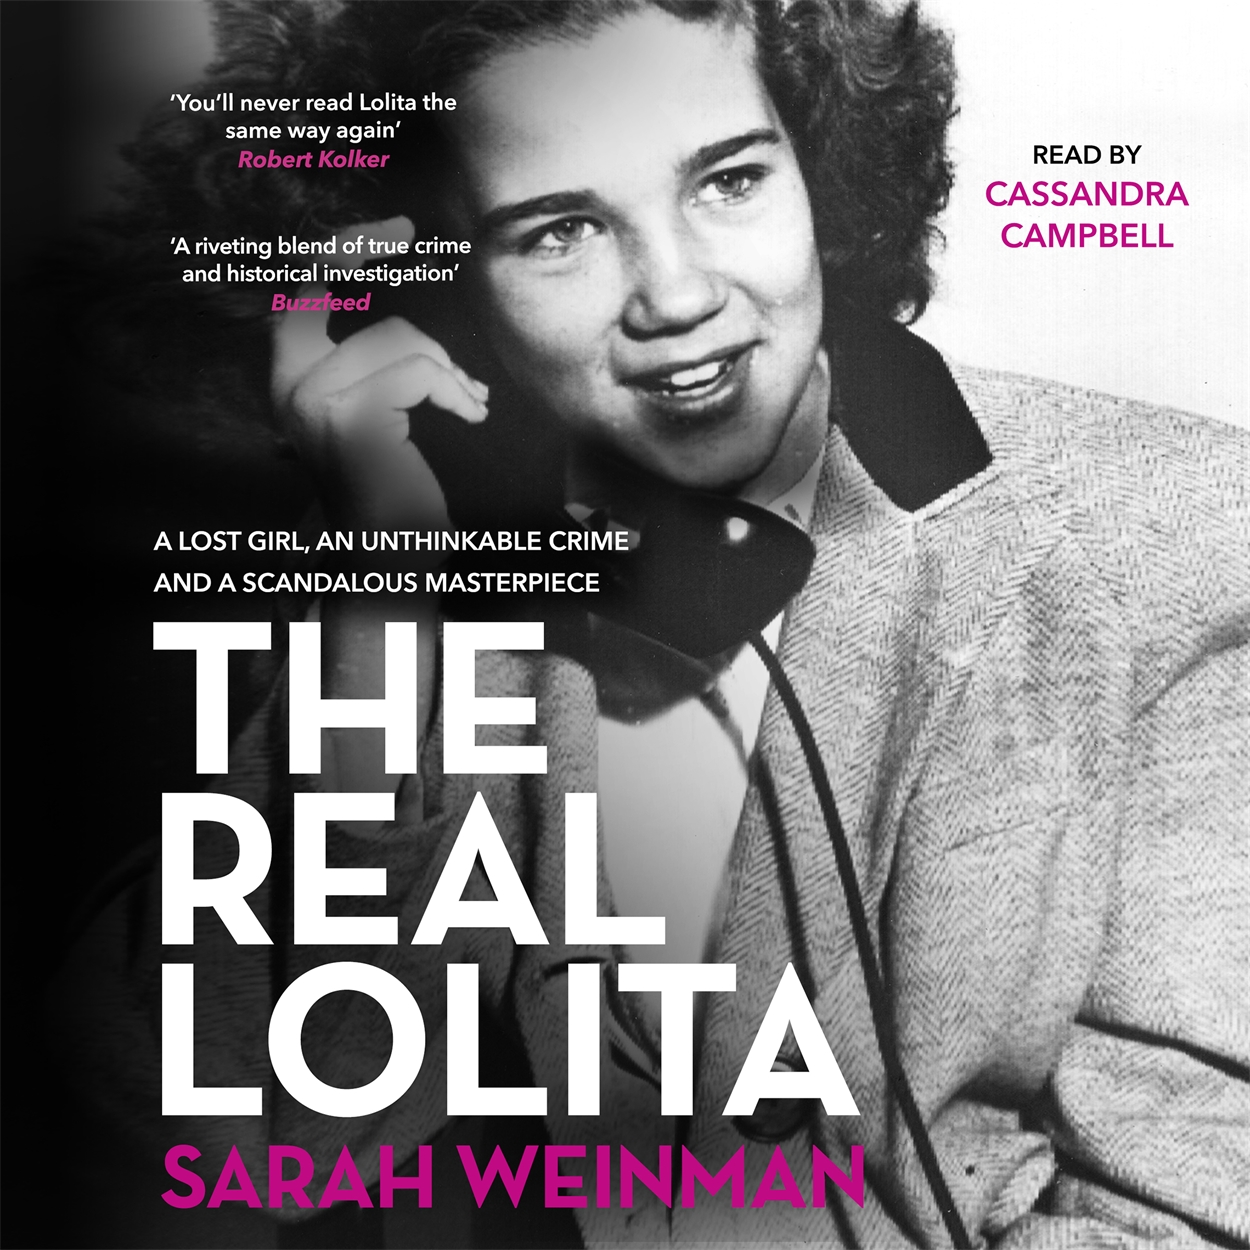 The Real Lolita by Sarah Weinman